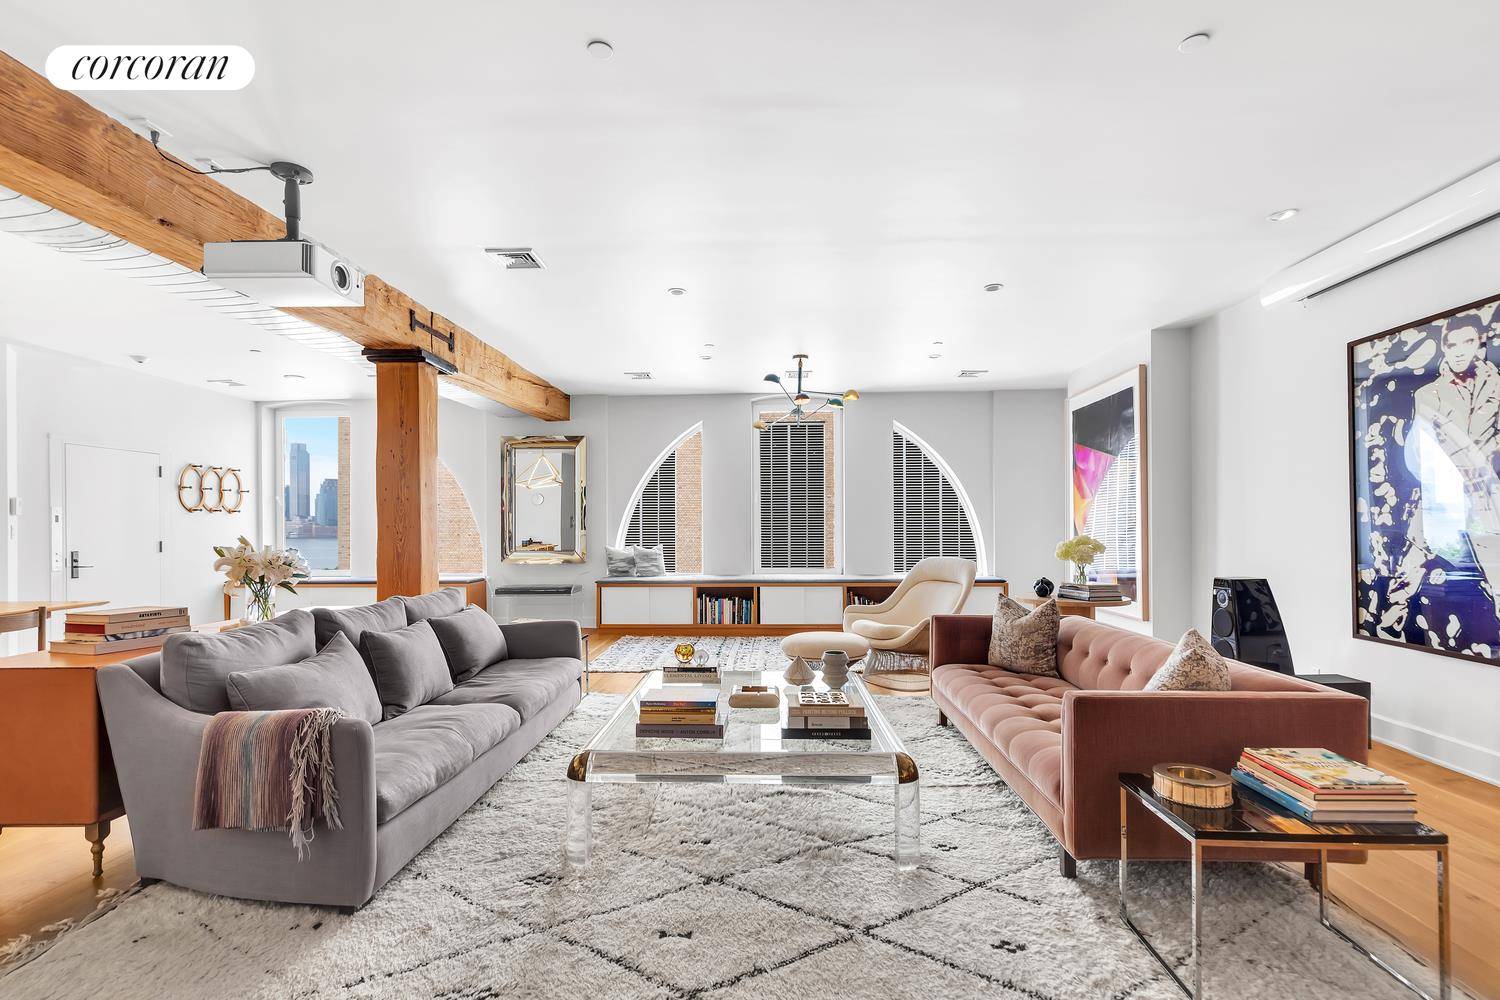 Modern luxury combines with pre war elements in this renovated authentic Hudson Square condominium loft that epitomizes the true essence of downtown living.